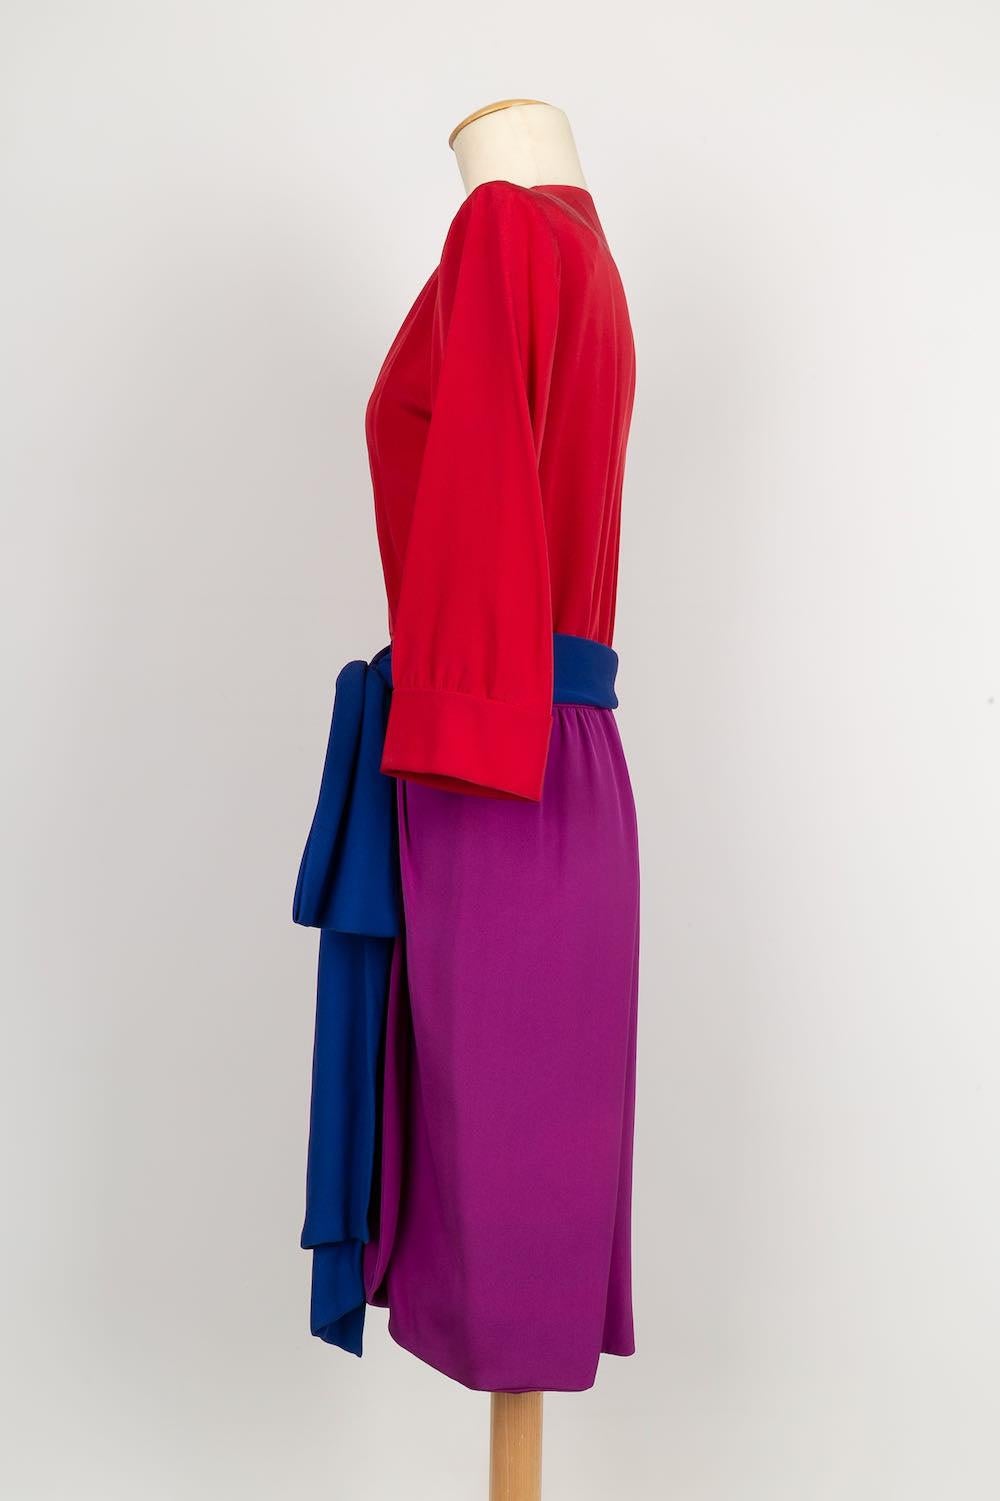 Yves Saint Laurent -(Made in France) Purple and red silk Haute Couture dress with a blue silk belt. No size indicated, it corresponds to a 36 FR. Haute Couture Spring/Summer 1985 fashion show.

Additional information: 

Dimensions: 
Shoulder width: